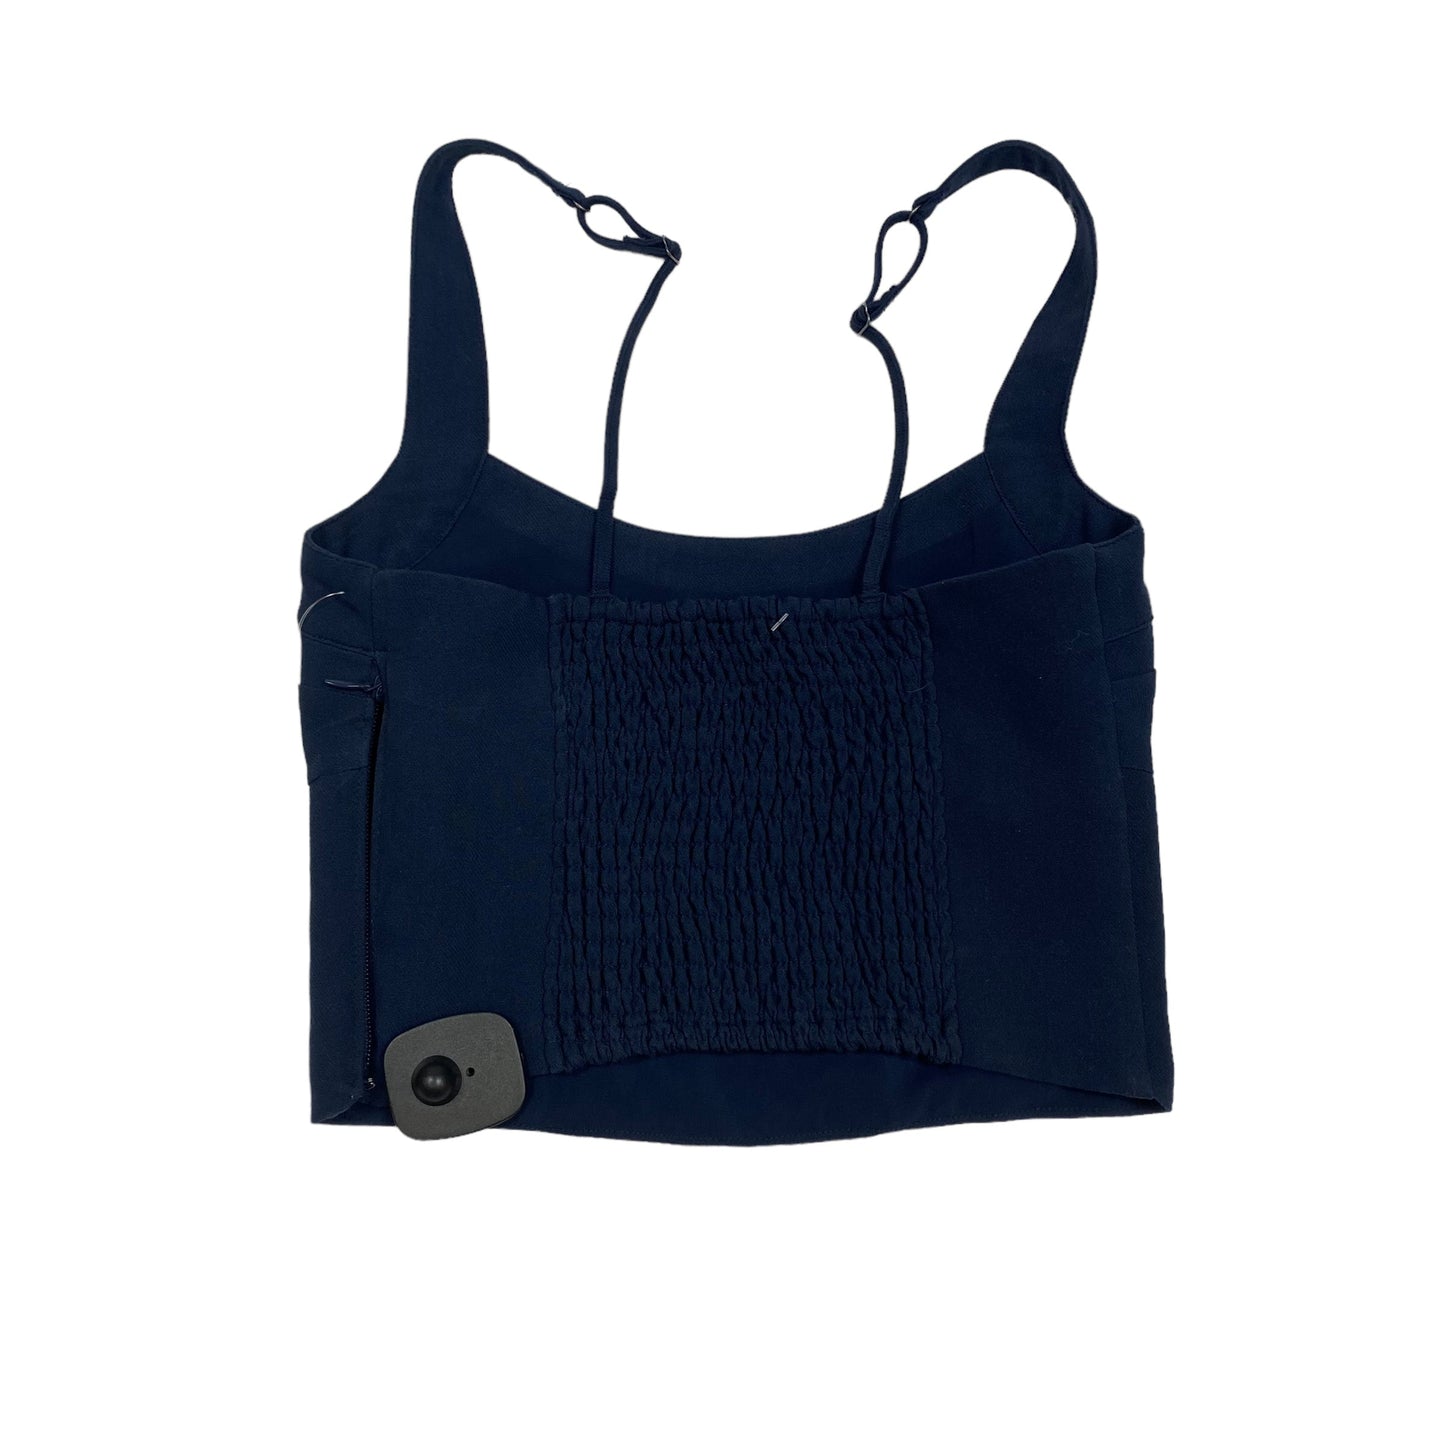 Navy Top Sleeveless Abercrombie And Fitch, Size Xs